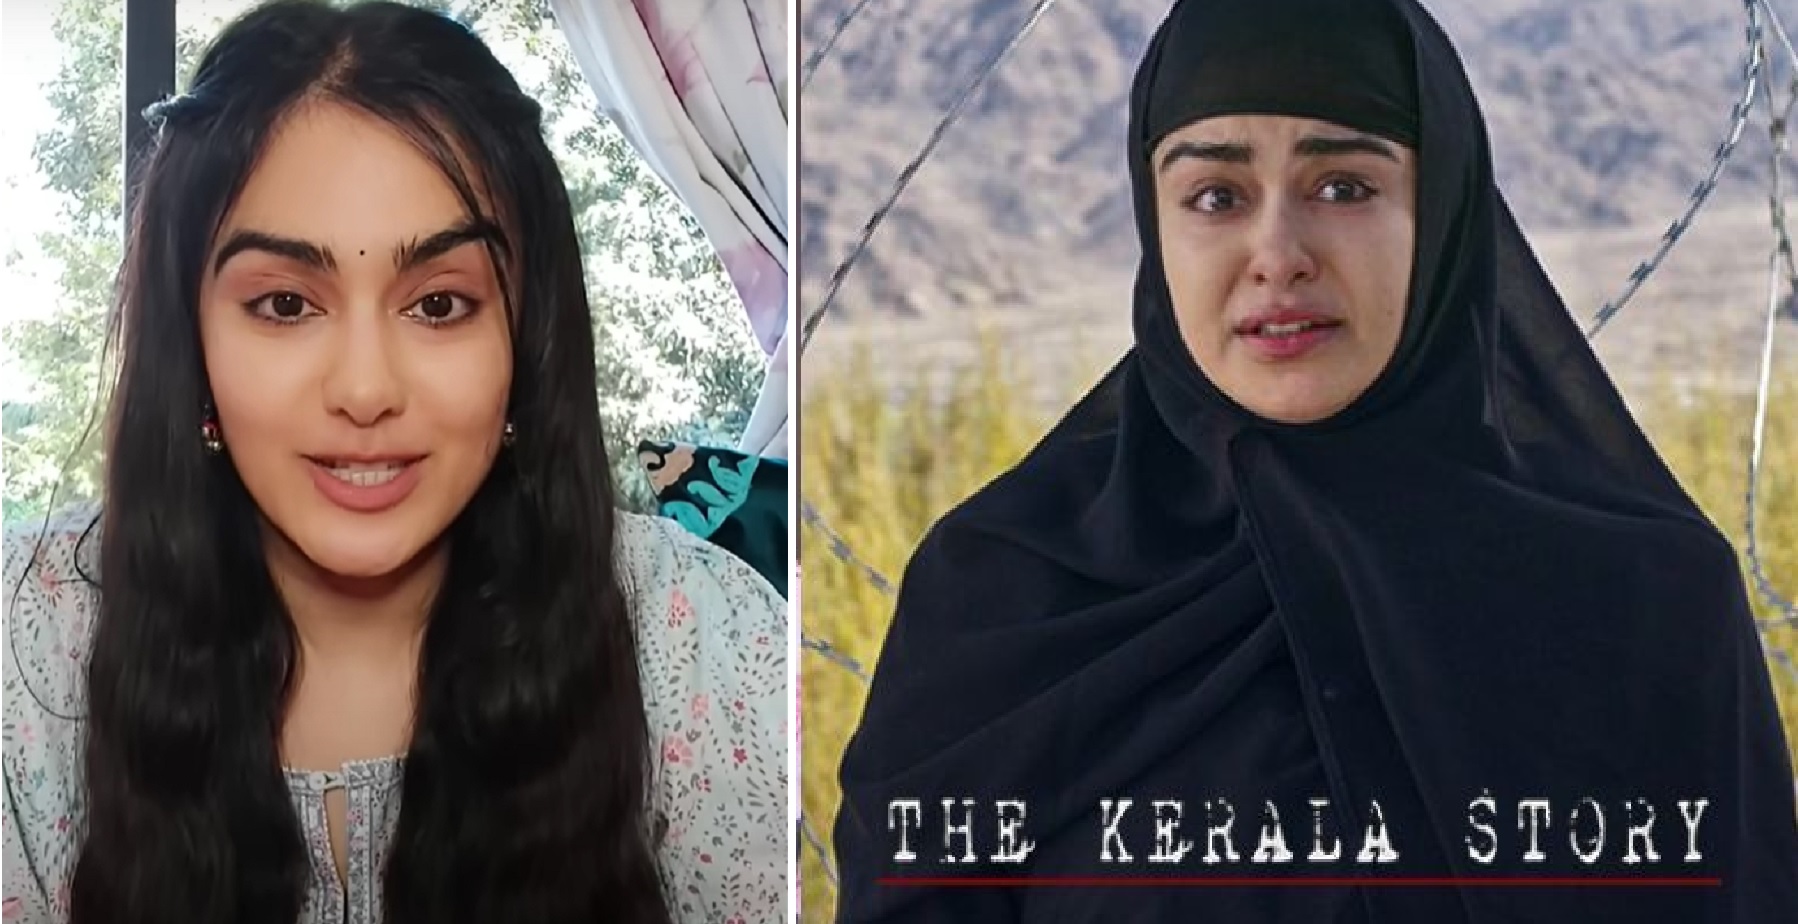 Adah Sharma On The Kerala Story: “Our Film Is Not Anti-Religion, But Anti-Terror Organizations”